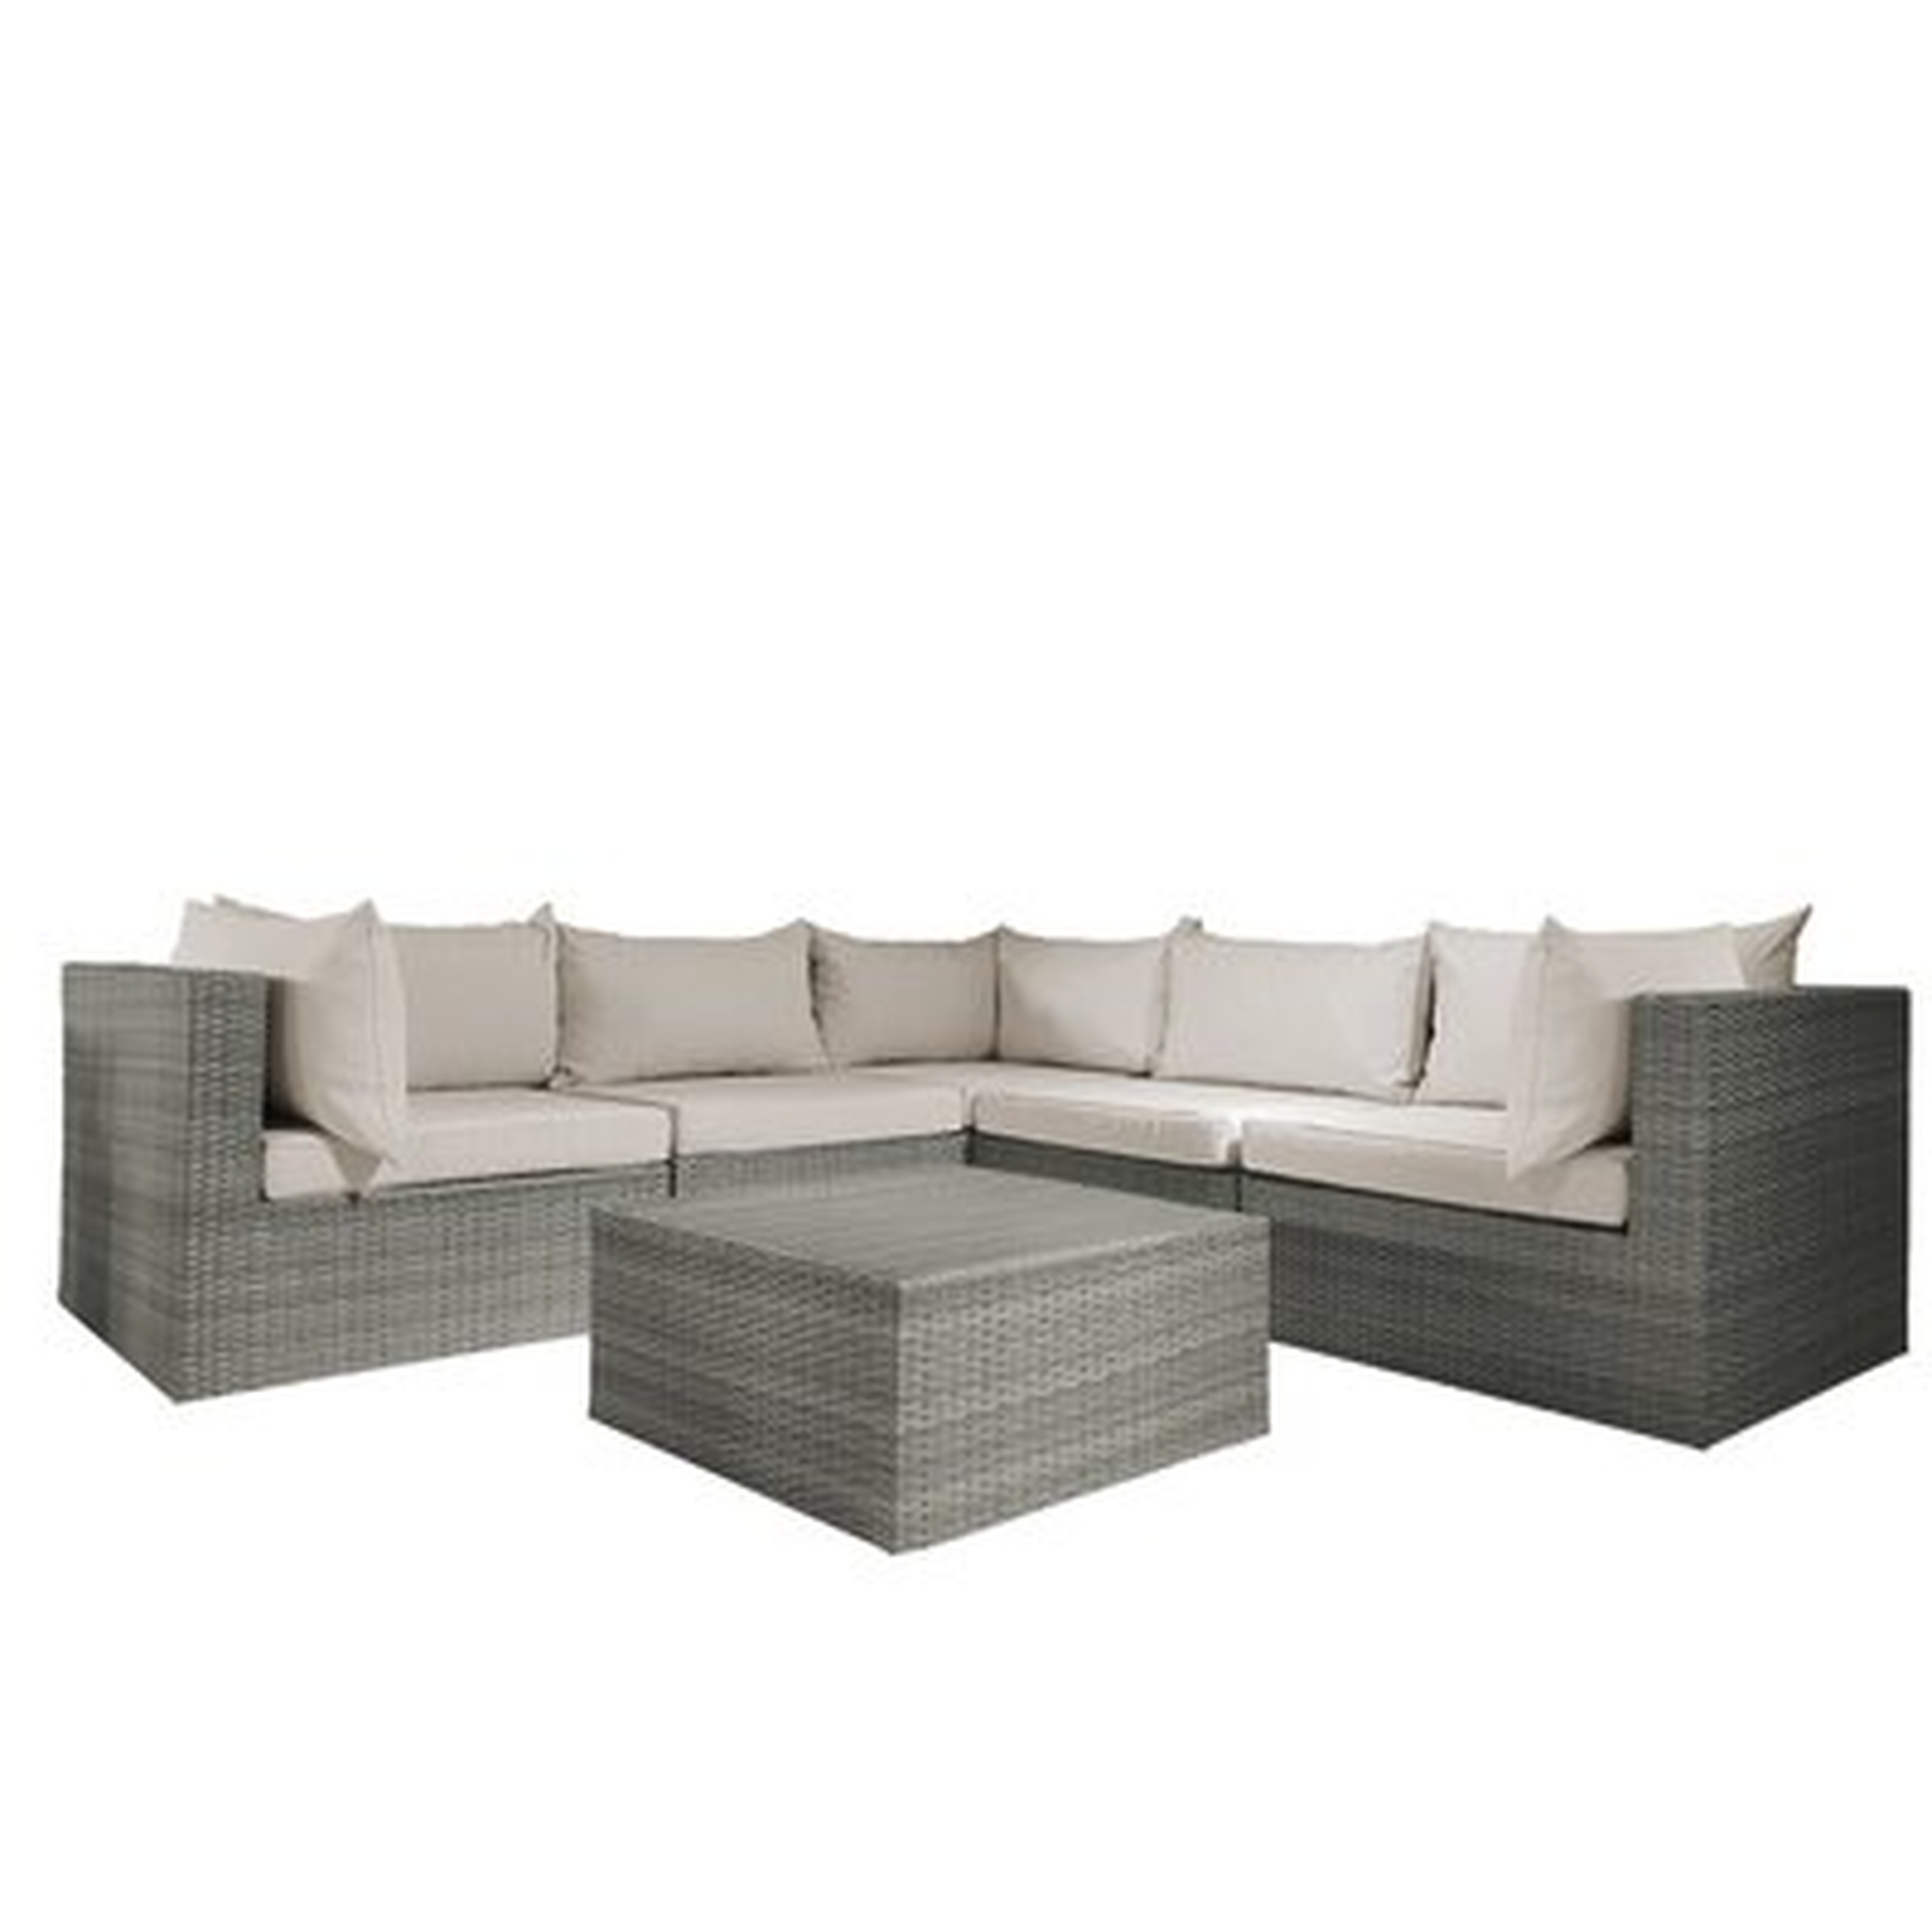 6 Piece Outdoor Sectional Seating Group With Cushions - Wayfair